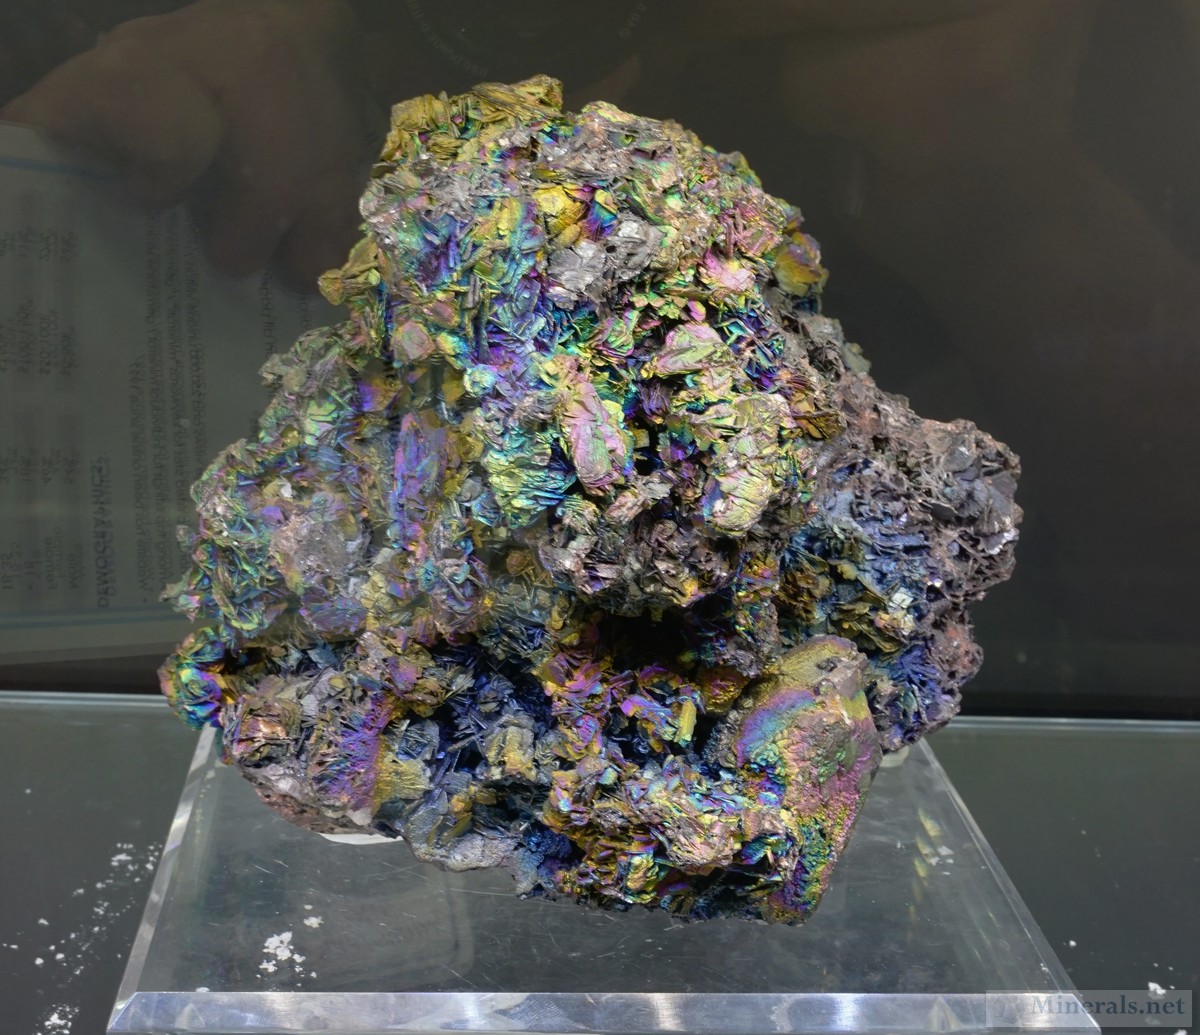 Minerals.net | Mineral News | The 2016 Tucson Gem and Mineral Show ...